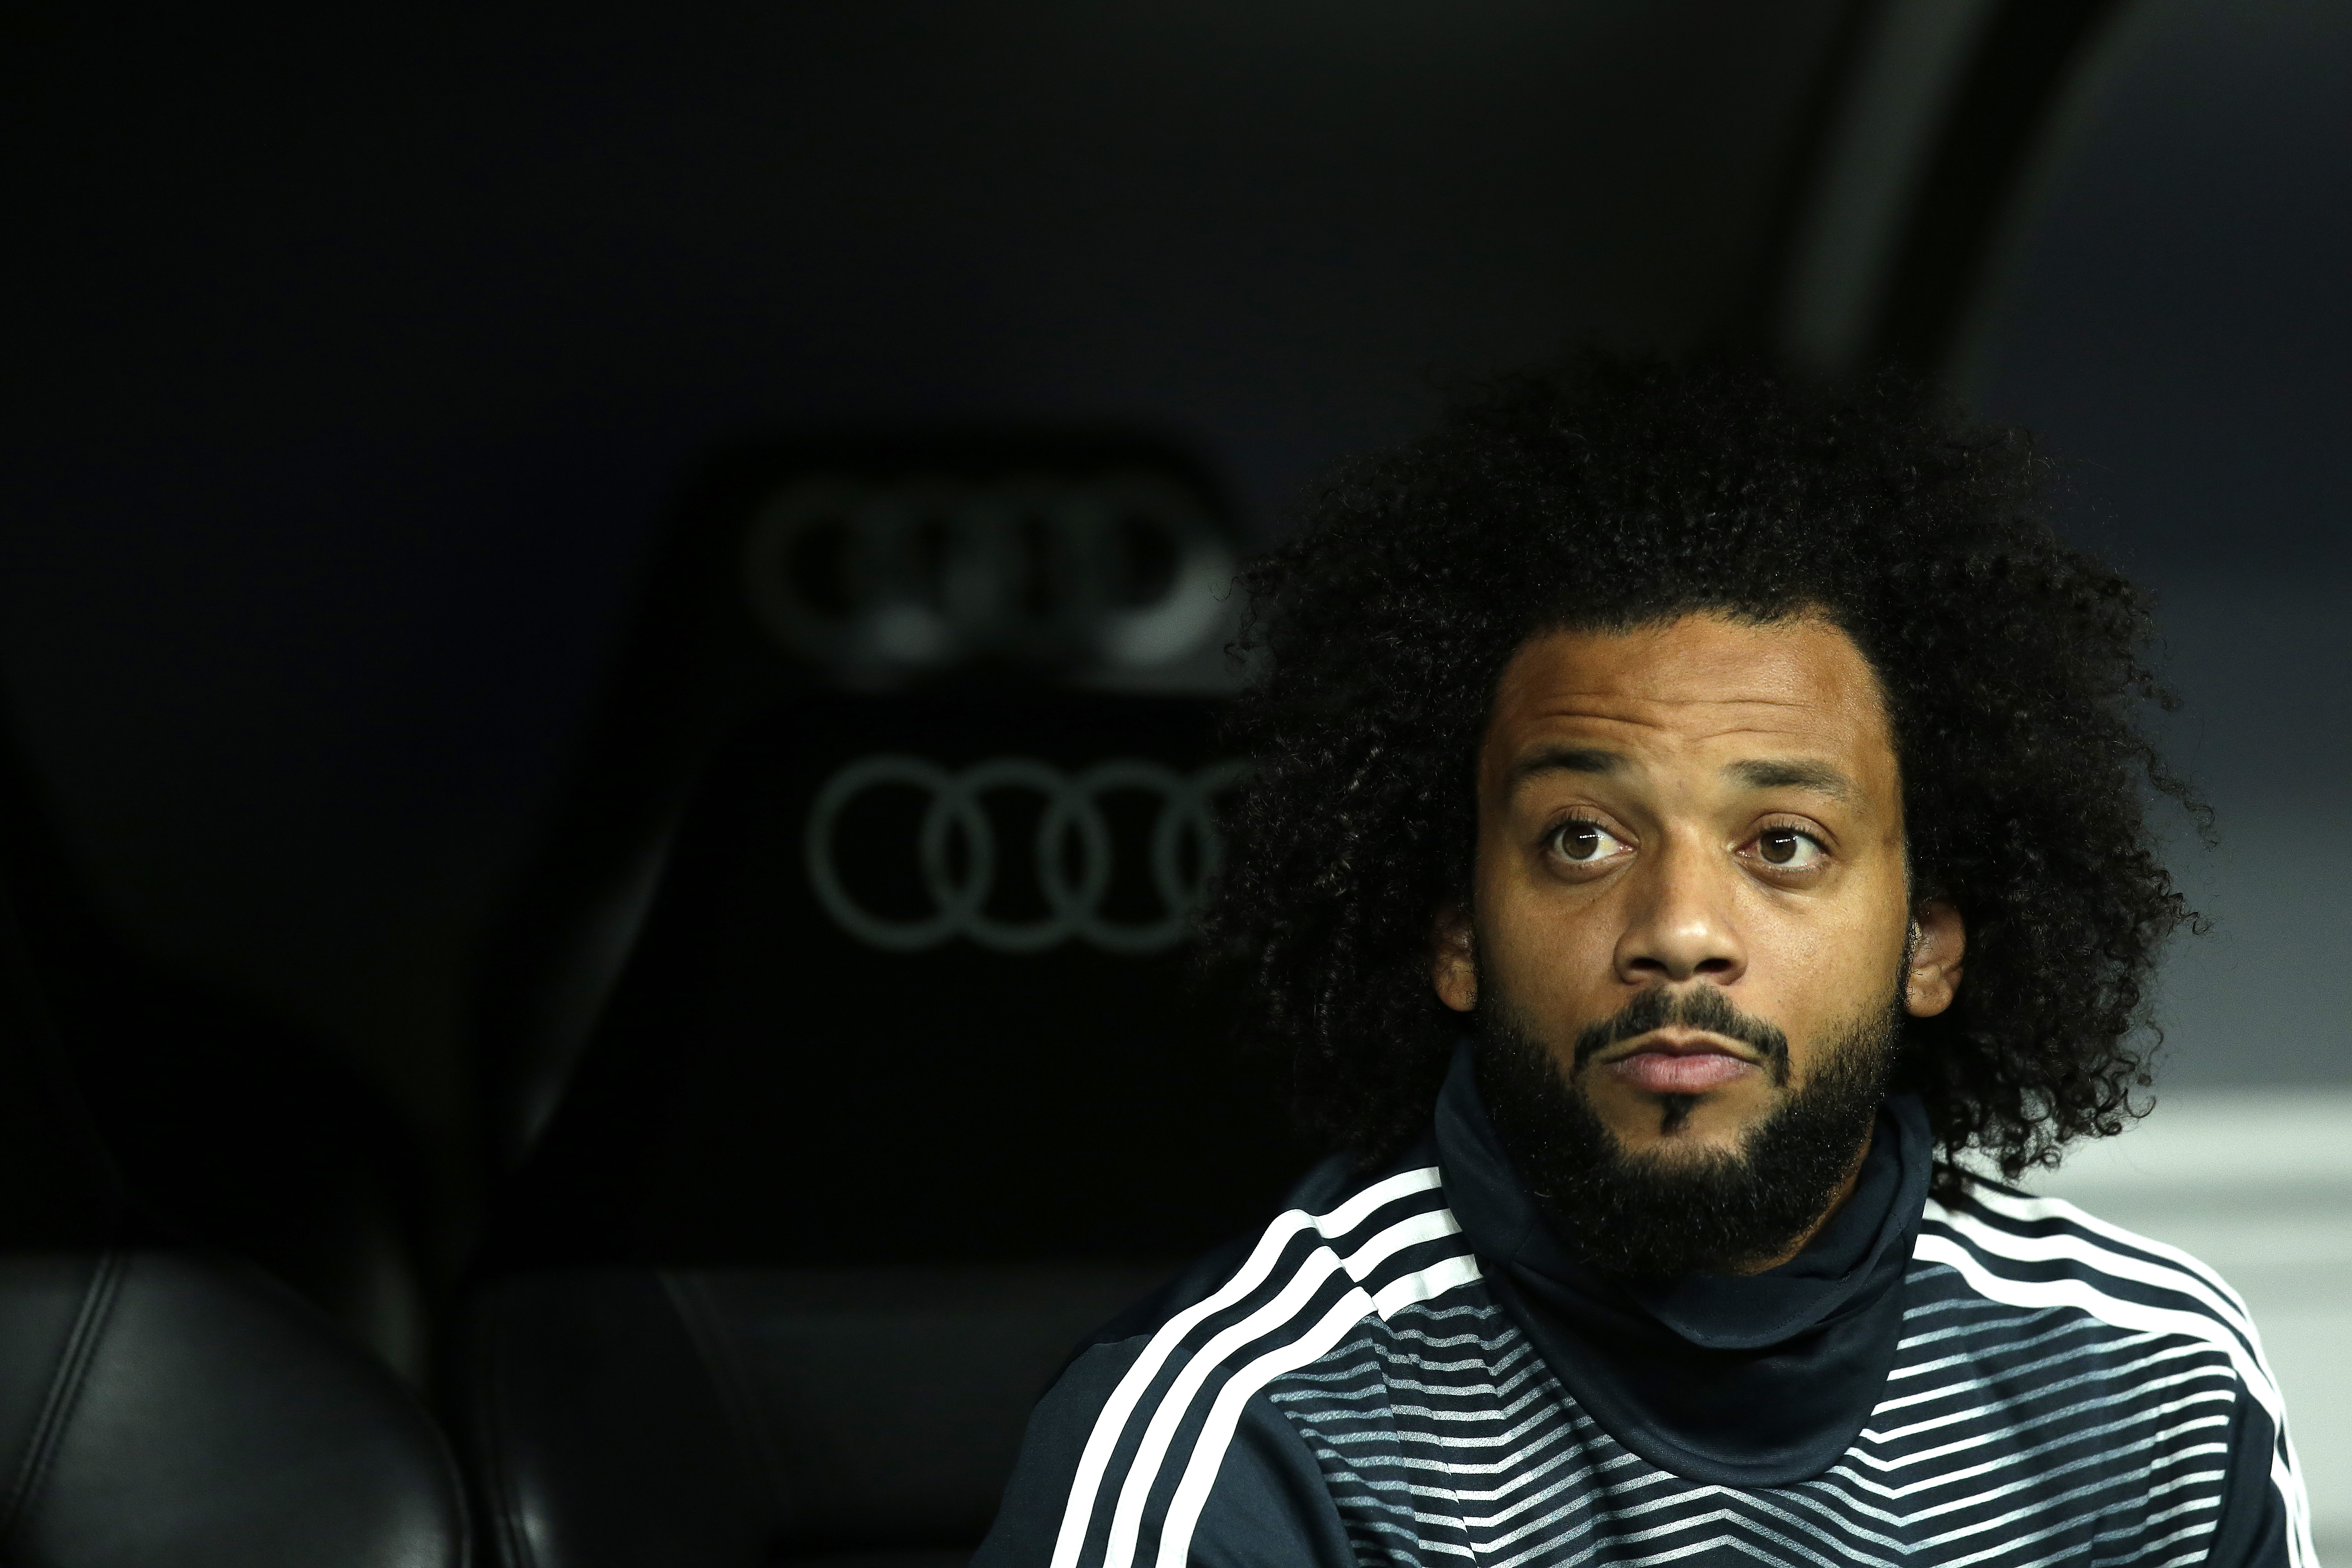 MADRID, SPAIN - MARCH 02: Marcelo of Real Madrid looks on from the bench during the La Liga match between Real Madrid CF and FC Barcelona at Estadio Santiago Bernabeu on March 02, 2019 in Madrid, Spain. (Photo by Gonzalo Arroyo Moreno/Getty Images)